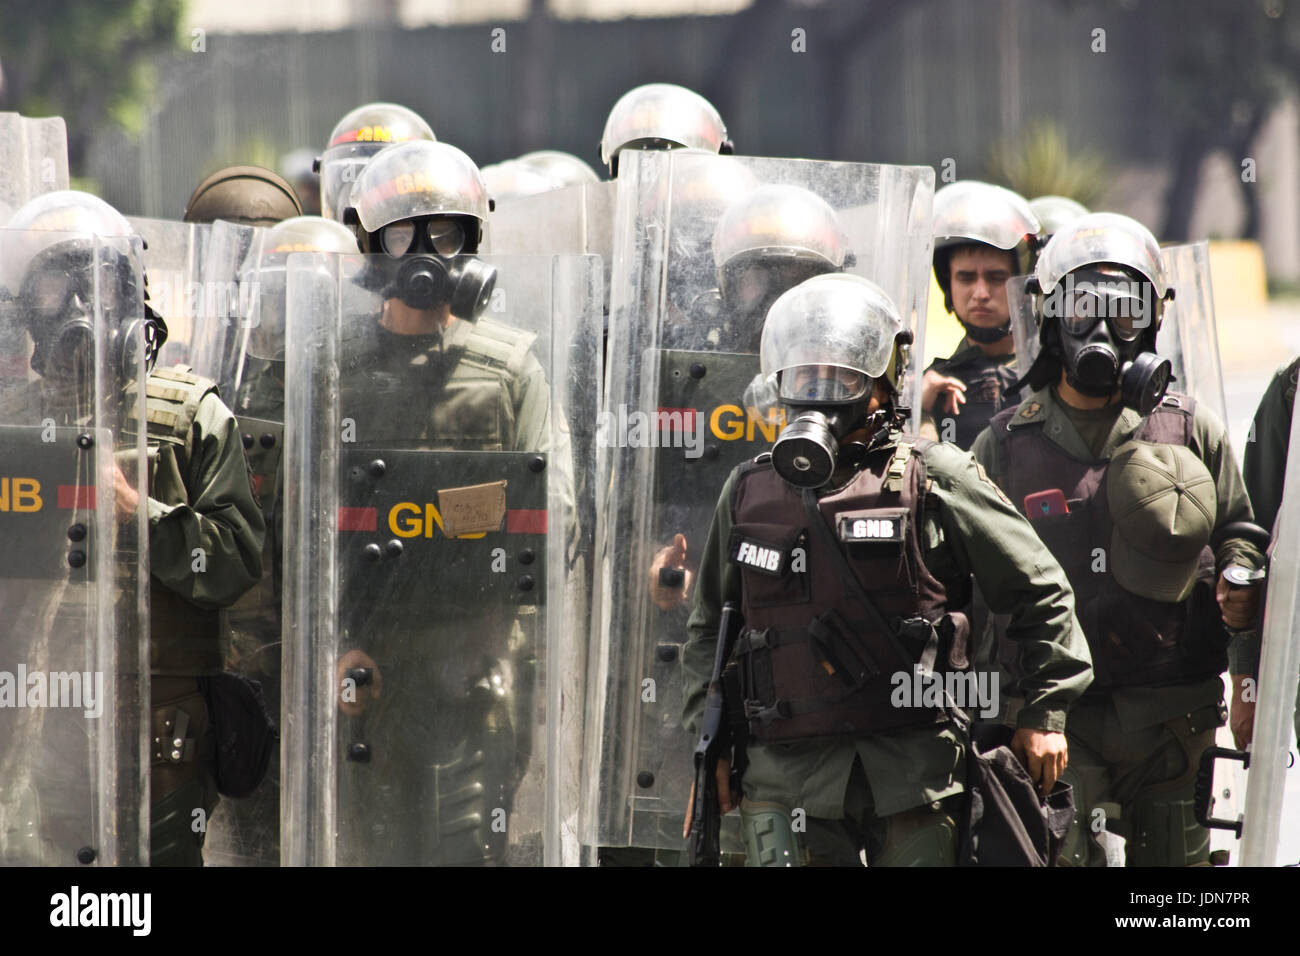 Soldiers from the Bolivarian National Guard getting ready to disperse a protest in Caracas. Stock Photo